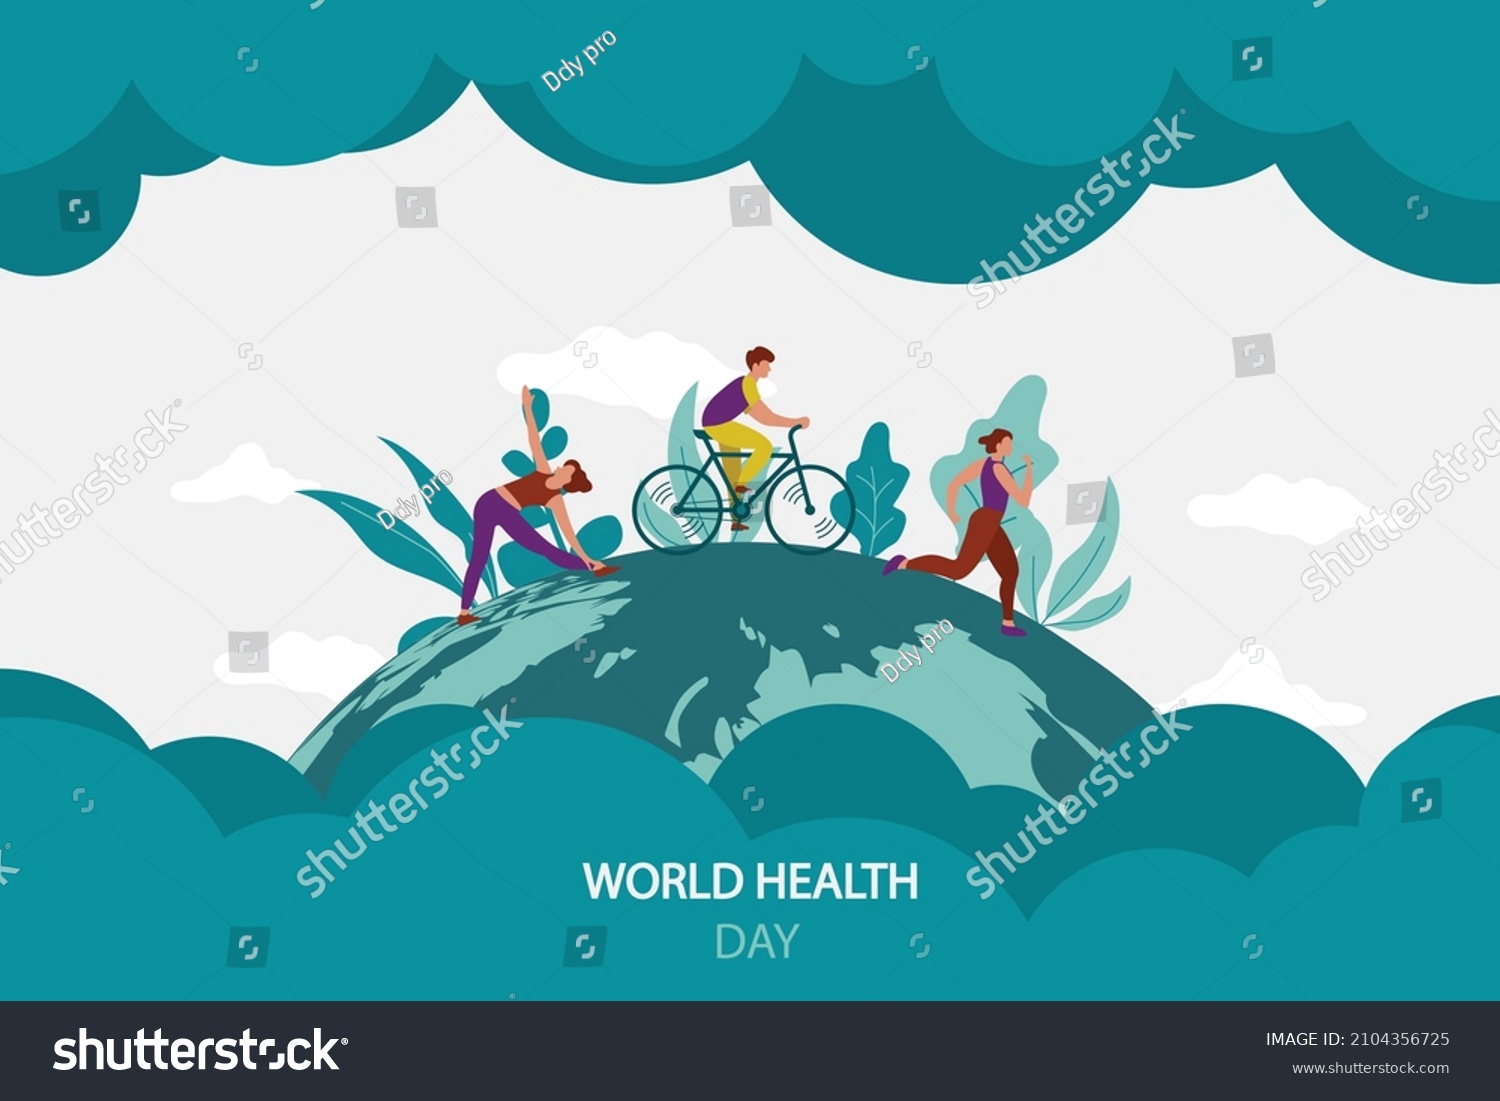 World Health Day. Healthy lifestyle. running, cycling, walking, yoga. Design elements in pastel colors with texture
 #2104356725